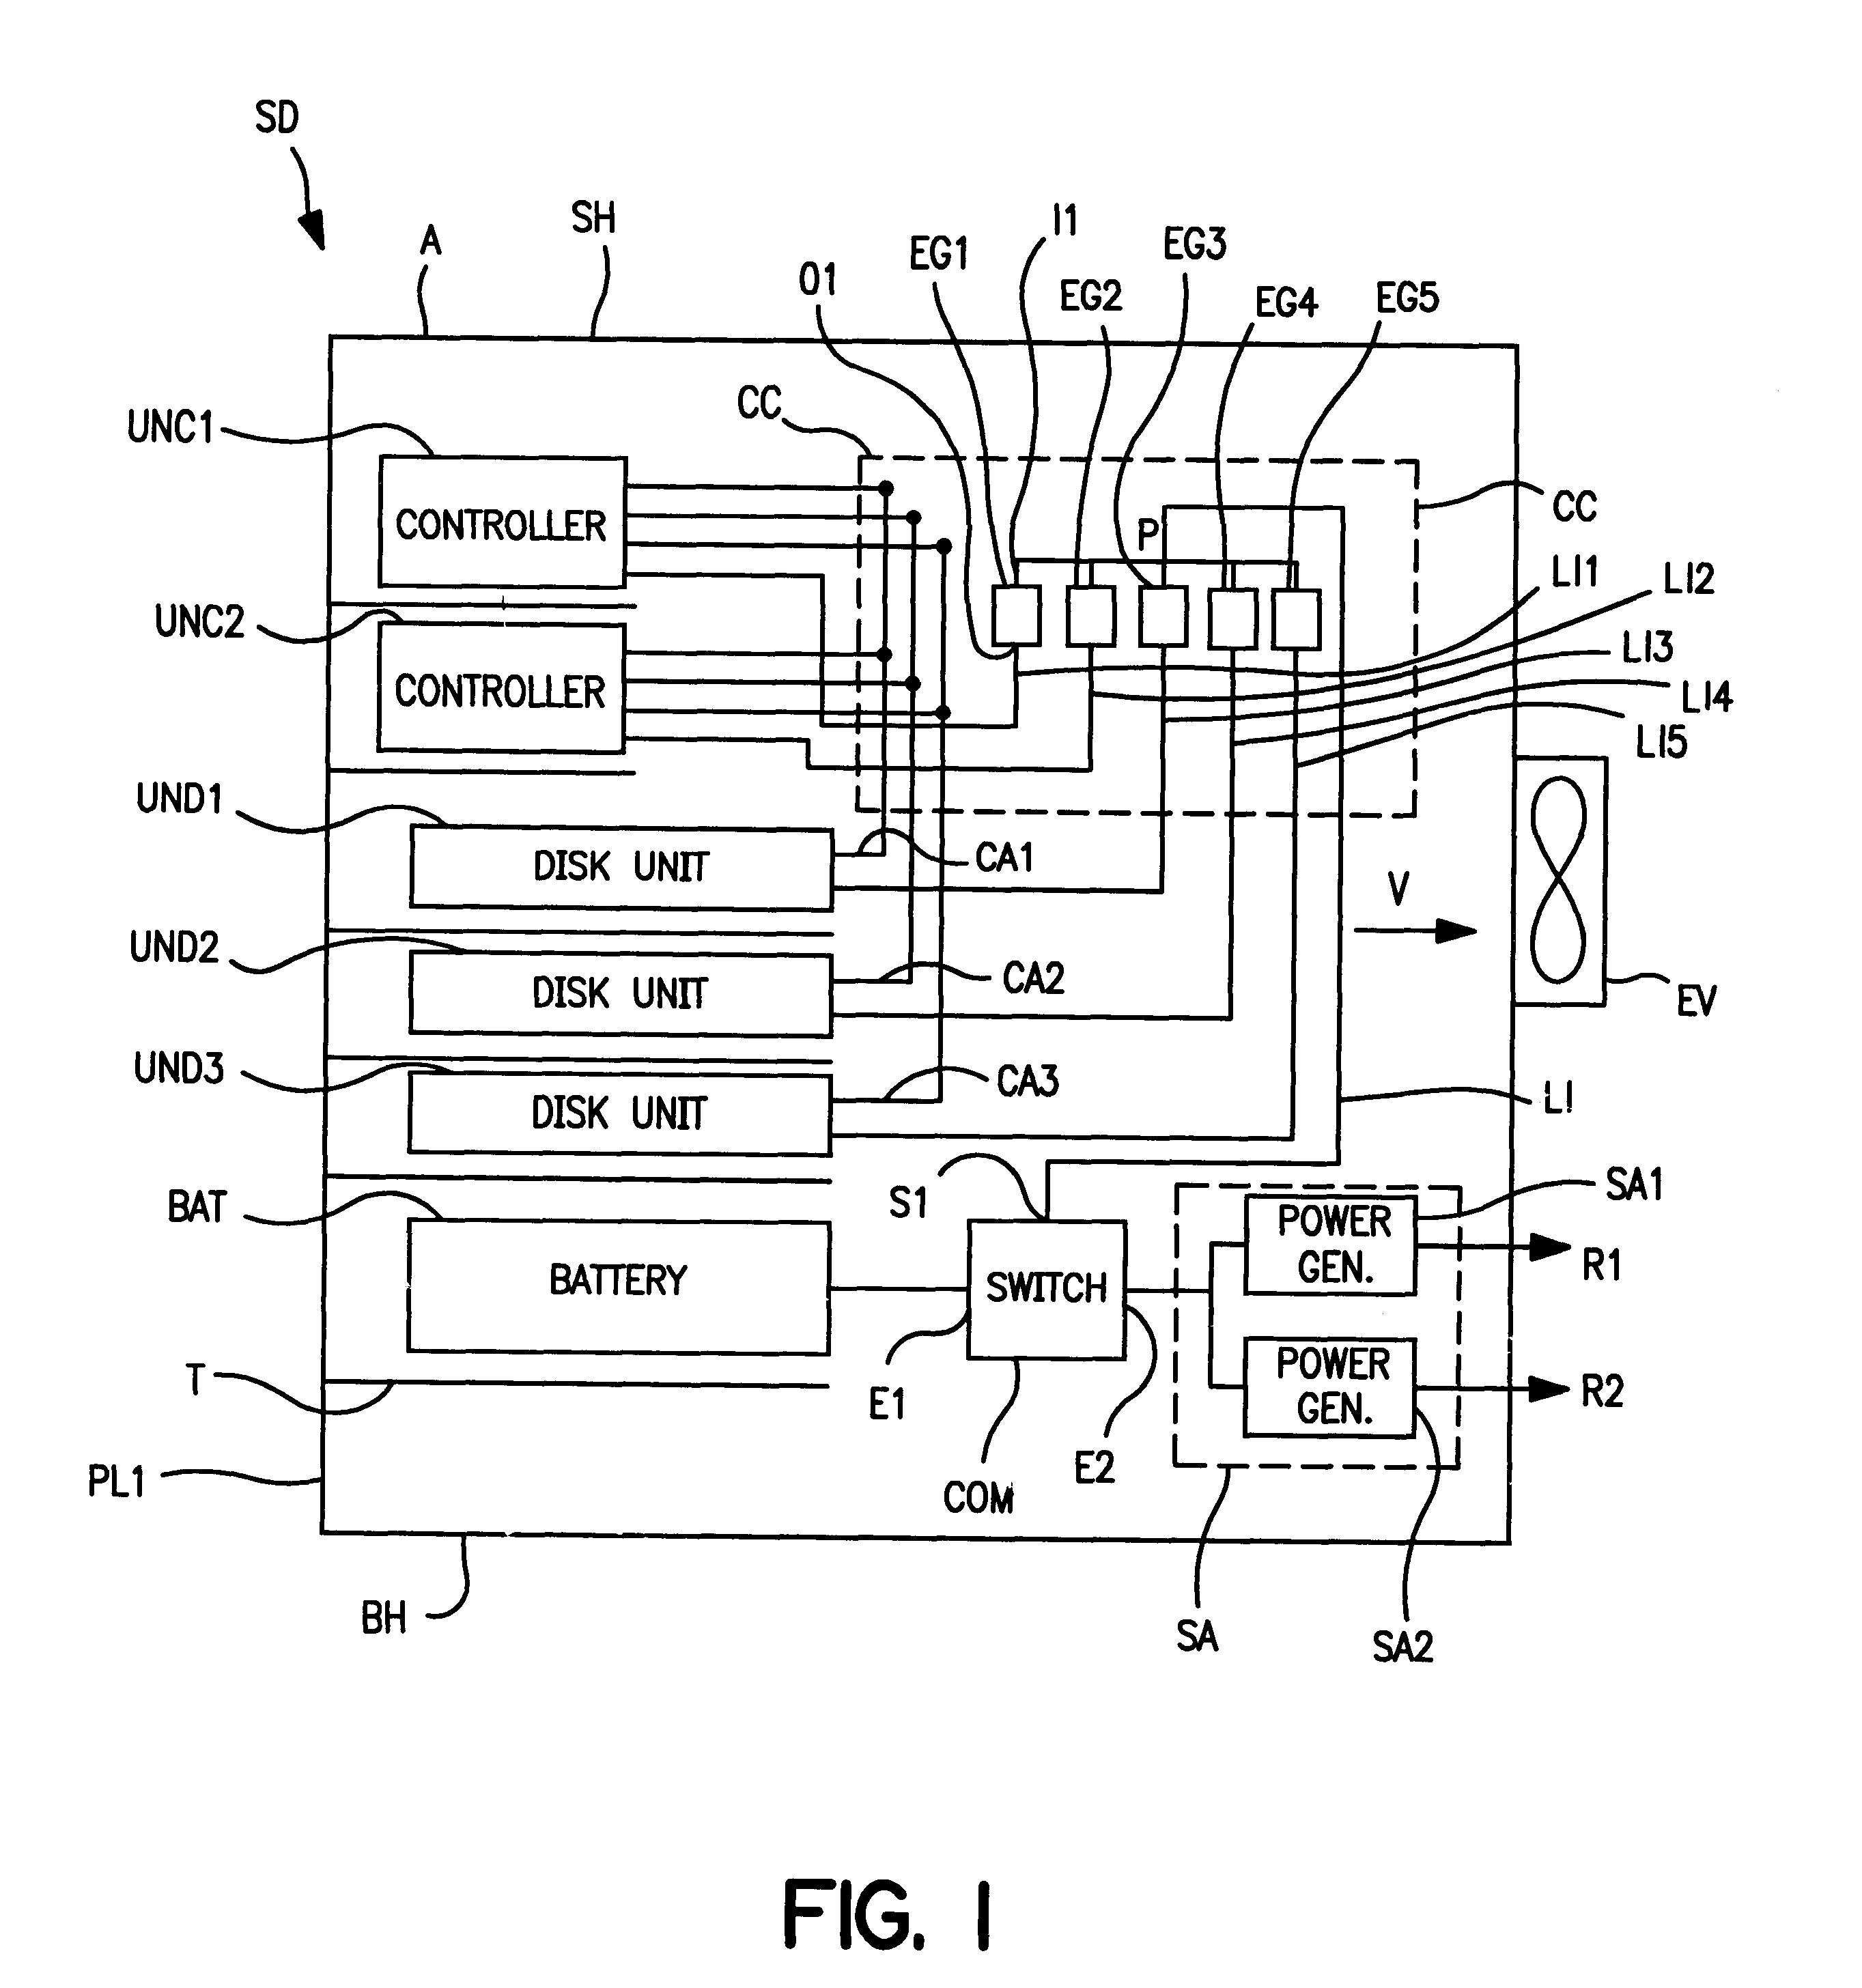 Protection against electrical faults in a mass memory data storage system